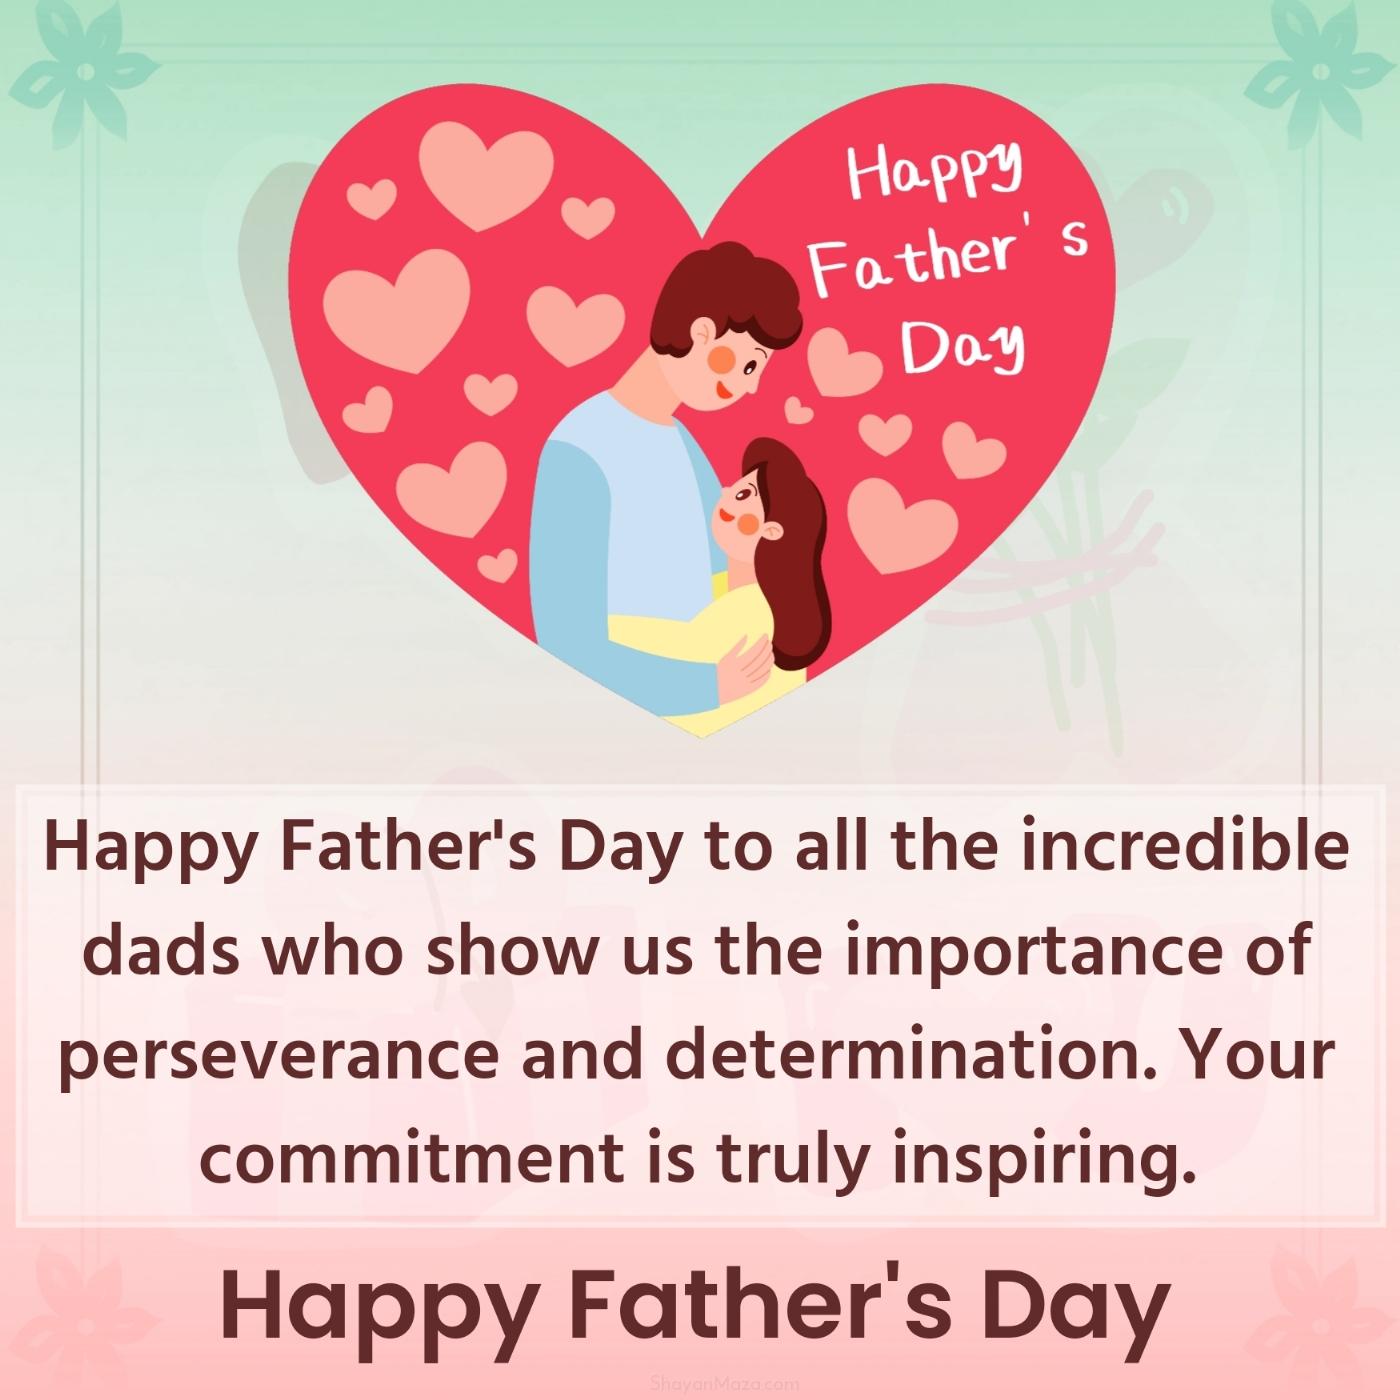 Happy Father's Day to all the incredible dads who show us the importance of perseverance